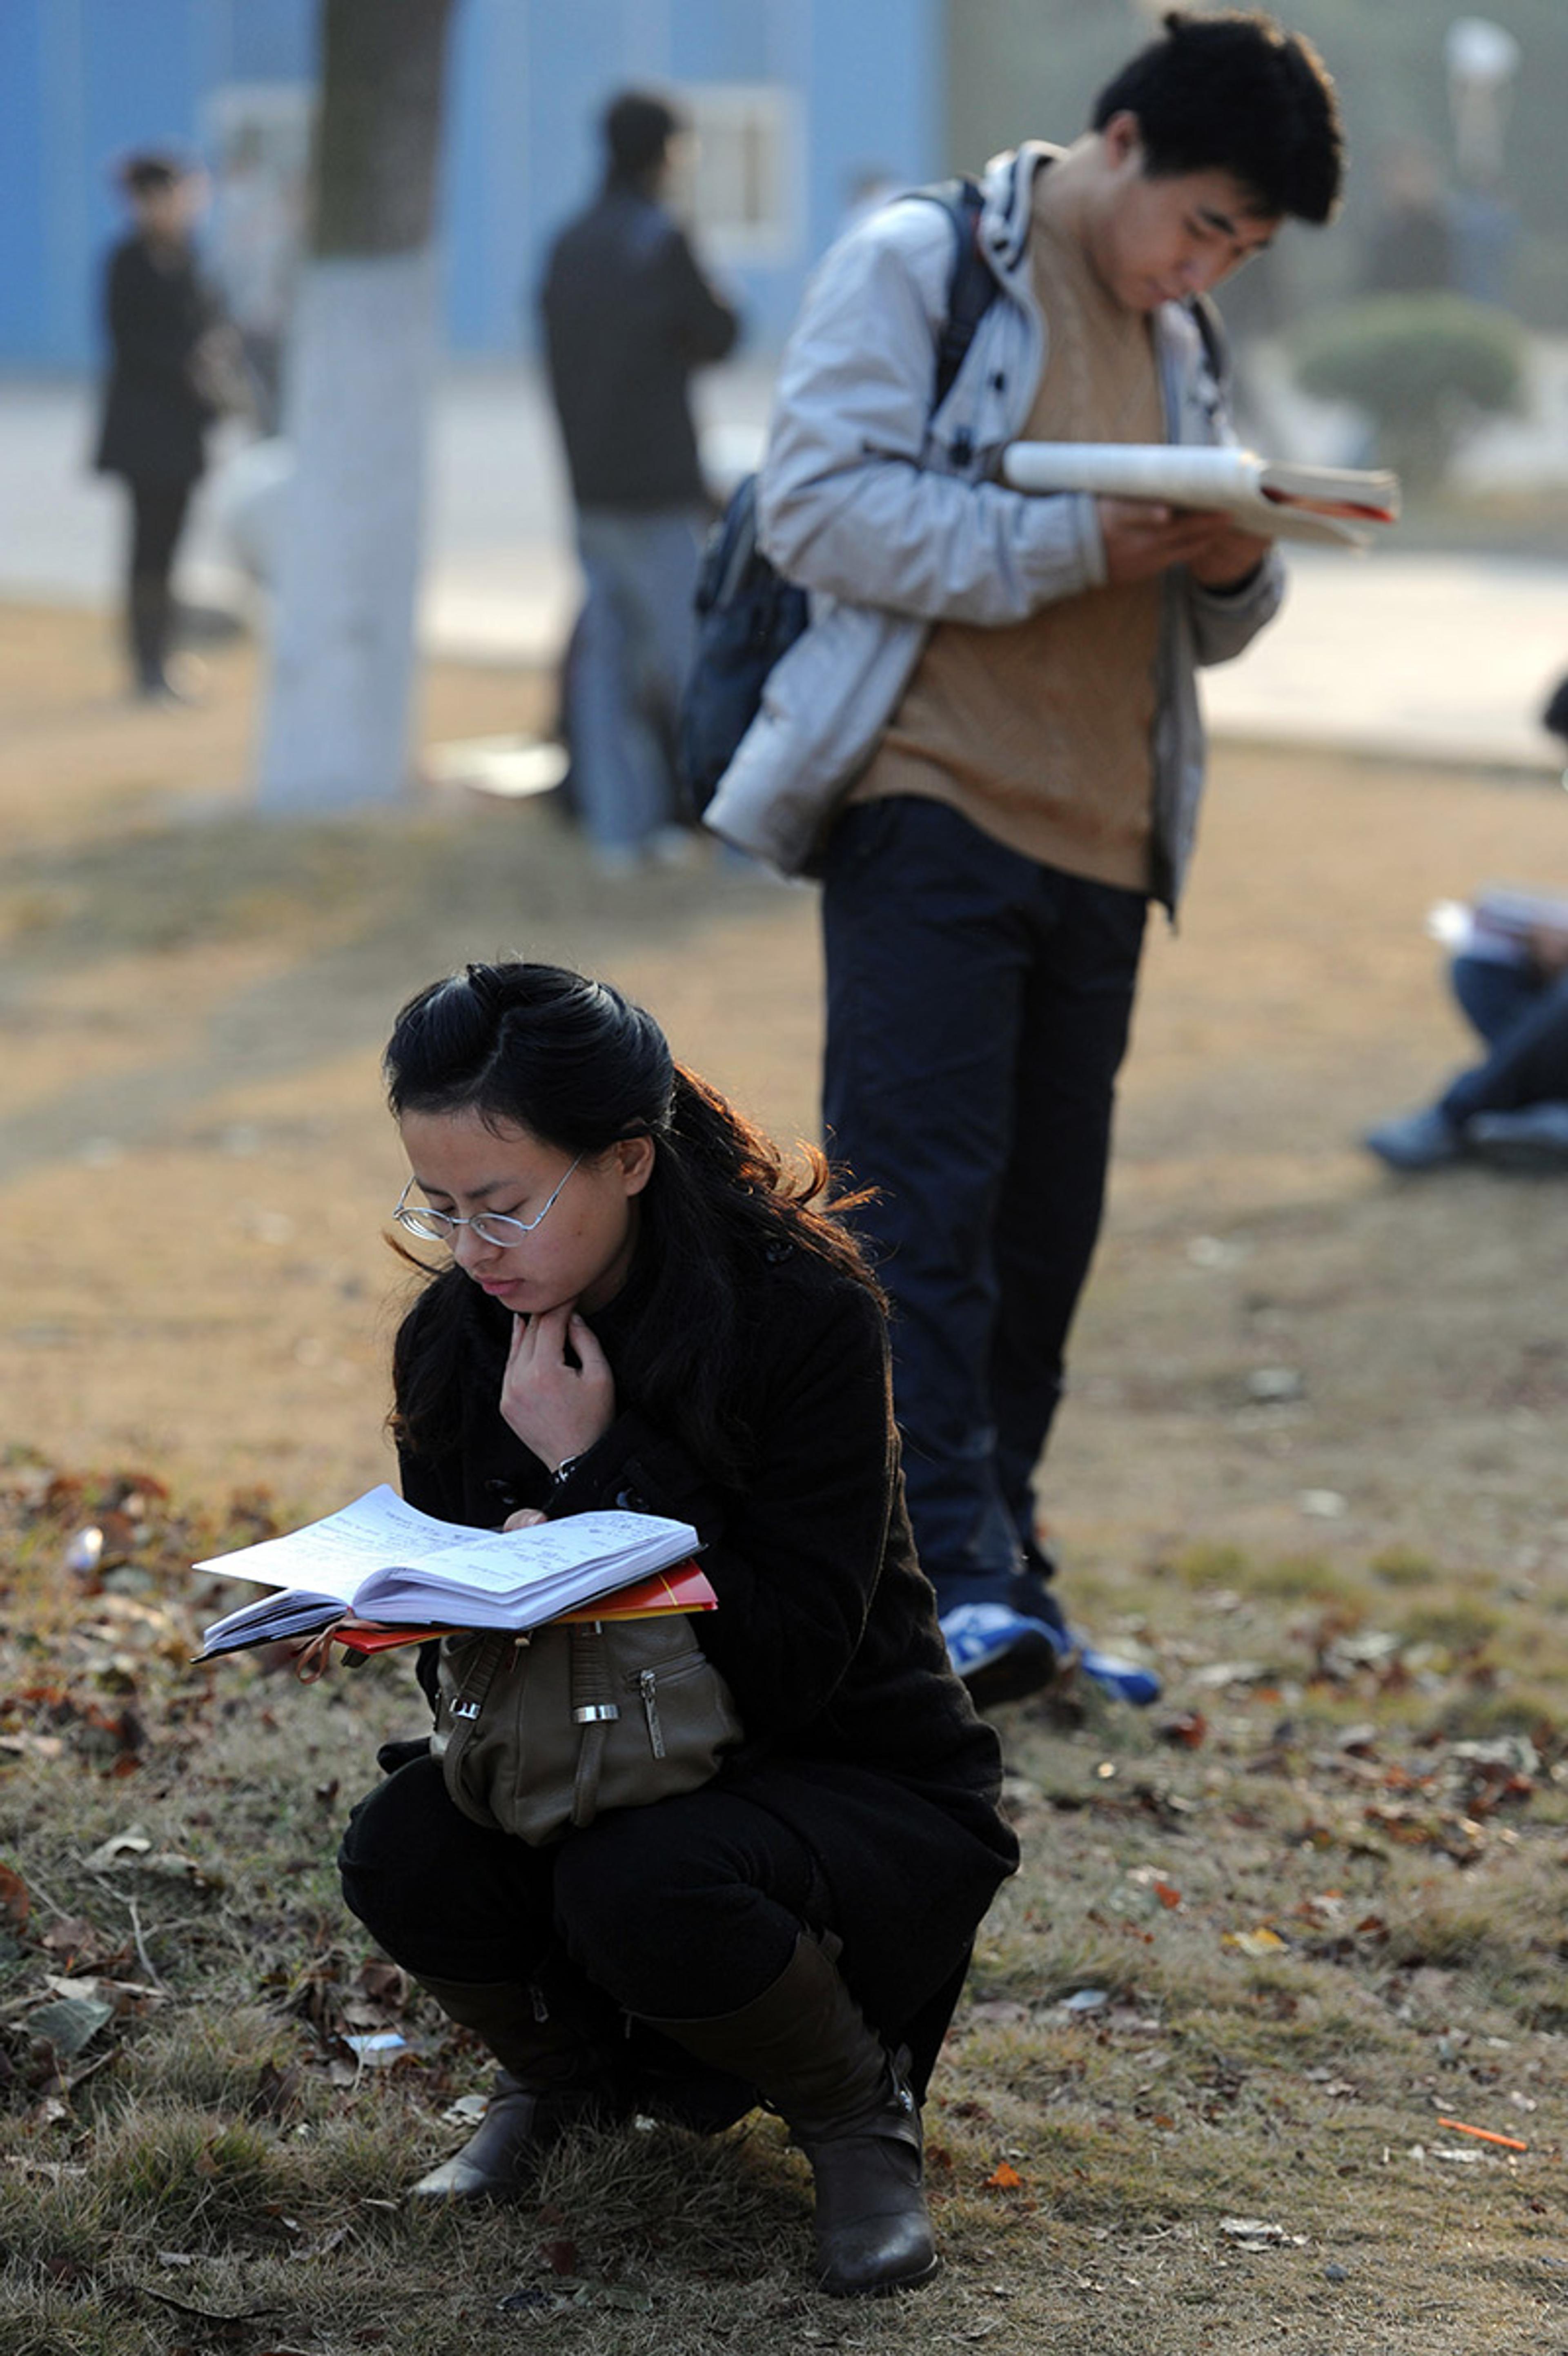 An anxious looking young woman and a young man are reading notebooks or textbooks outside an examination hall